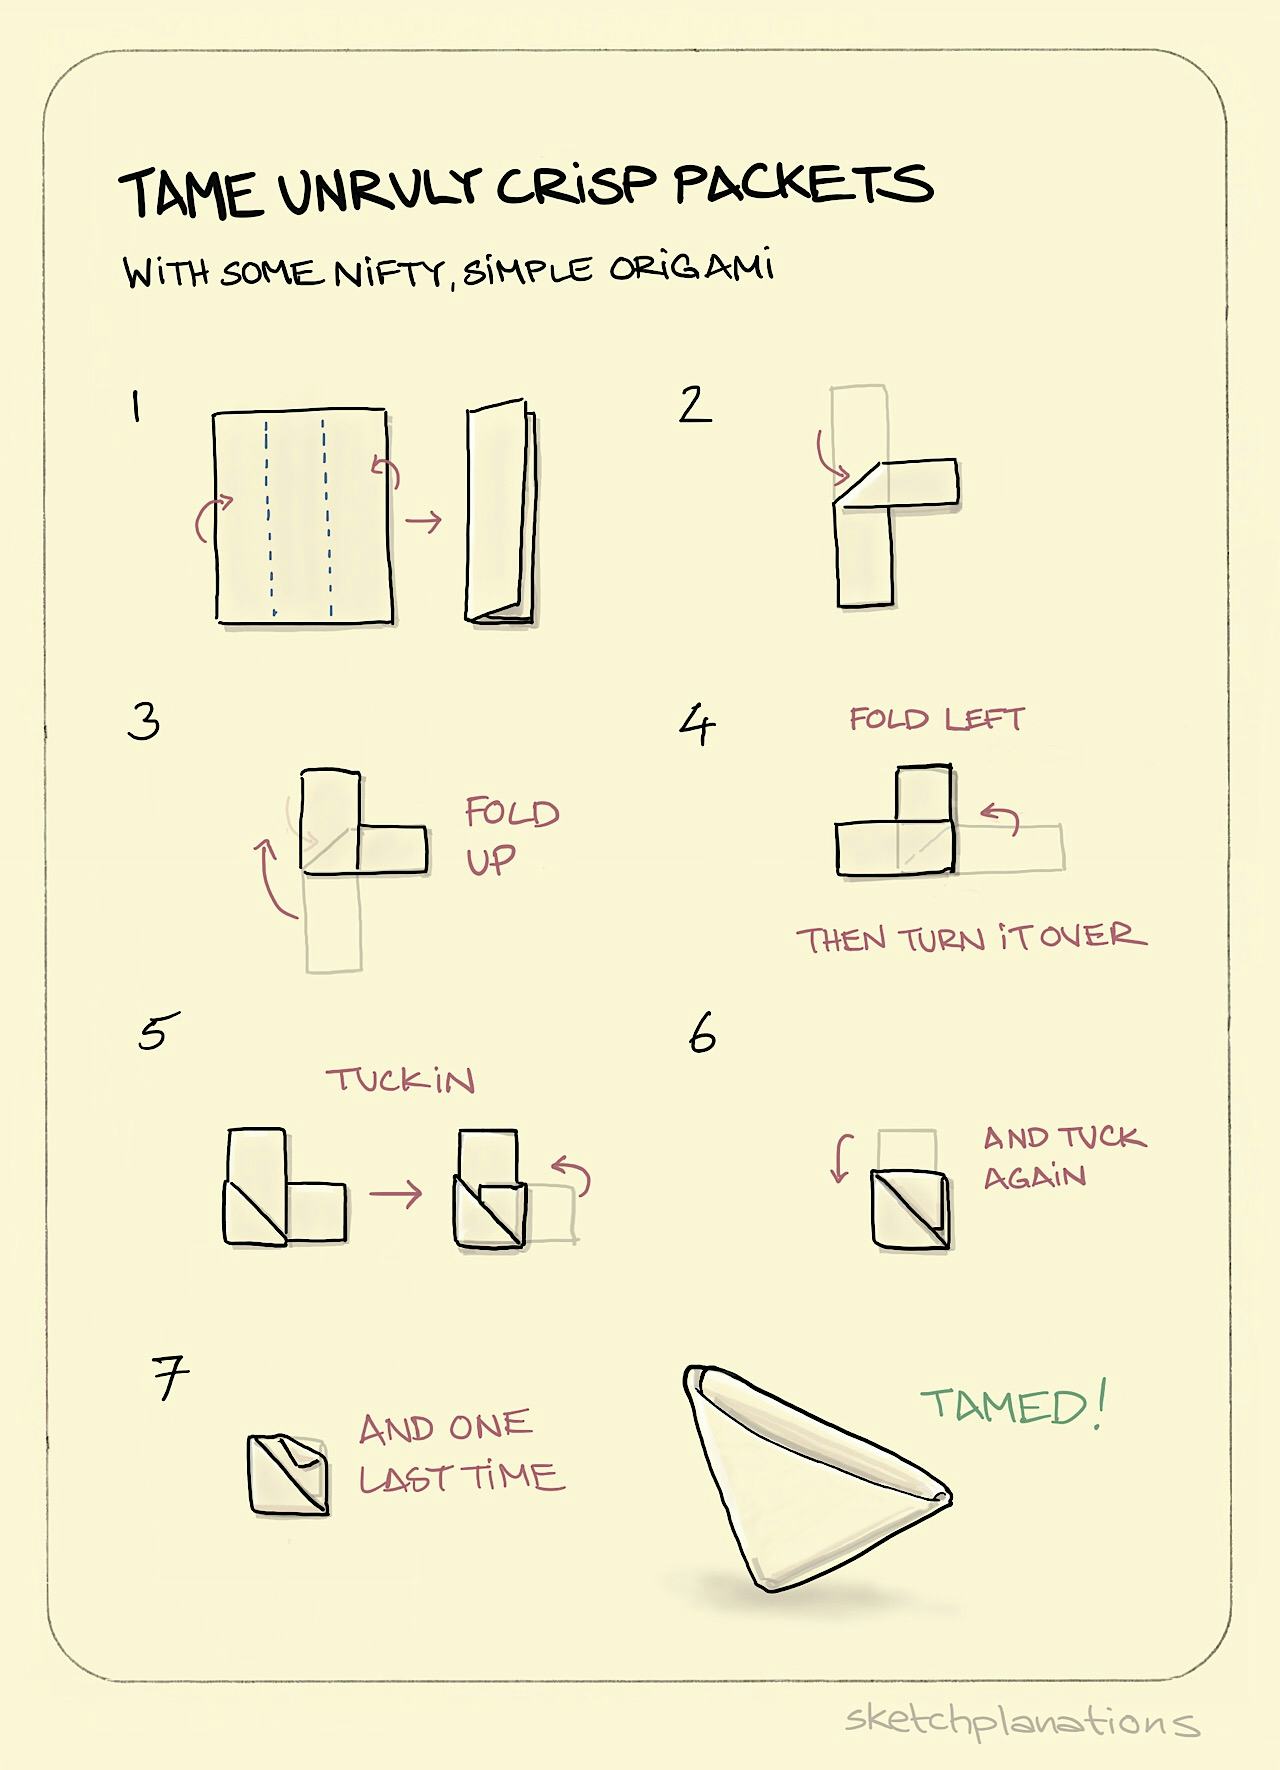 Tame unruly crisp packets - Sketchplanations